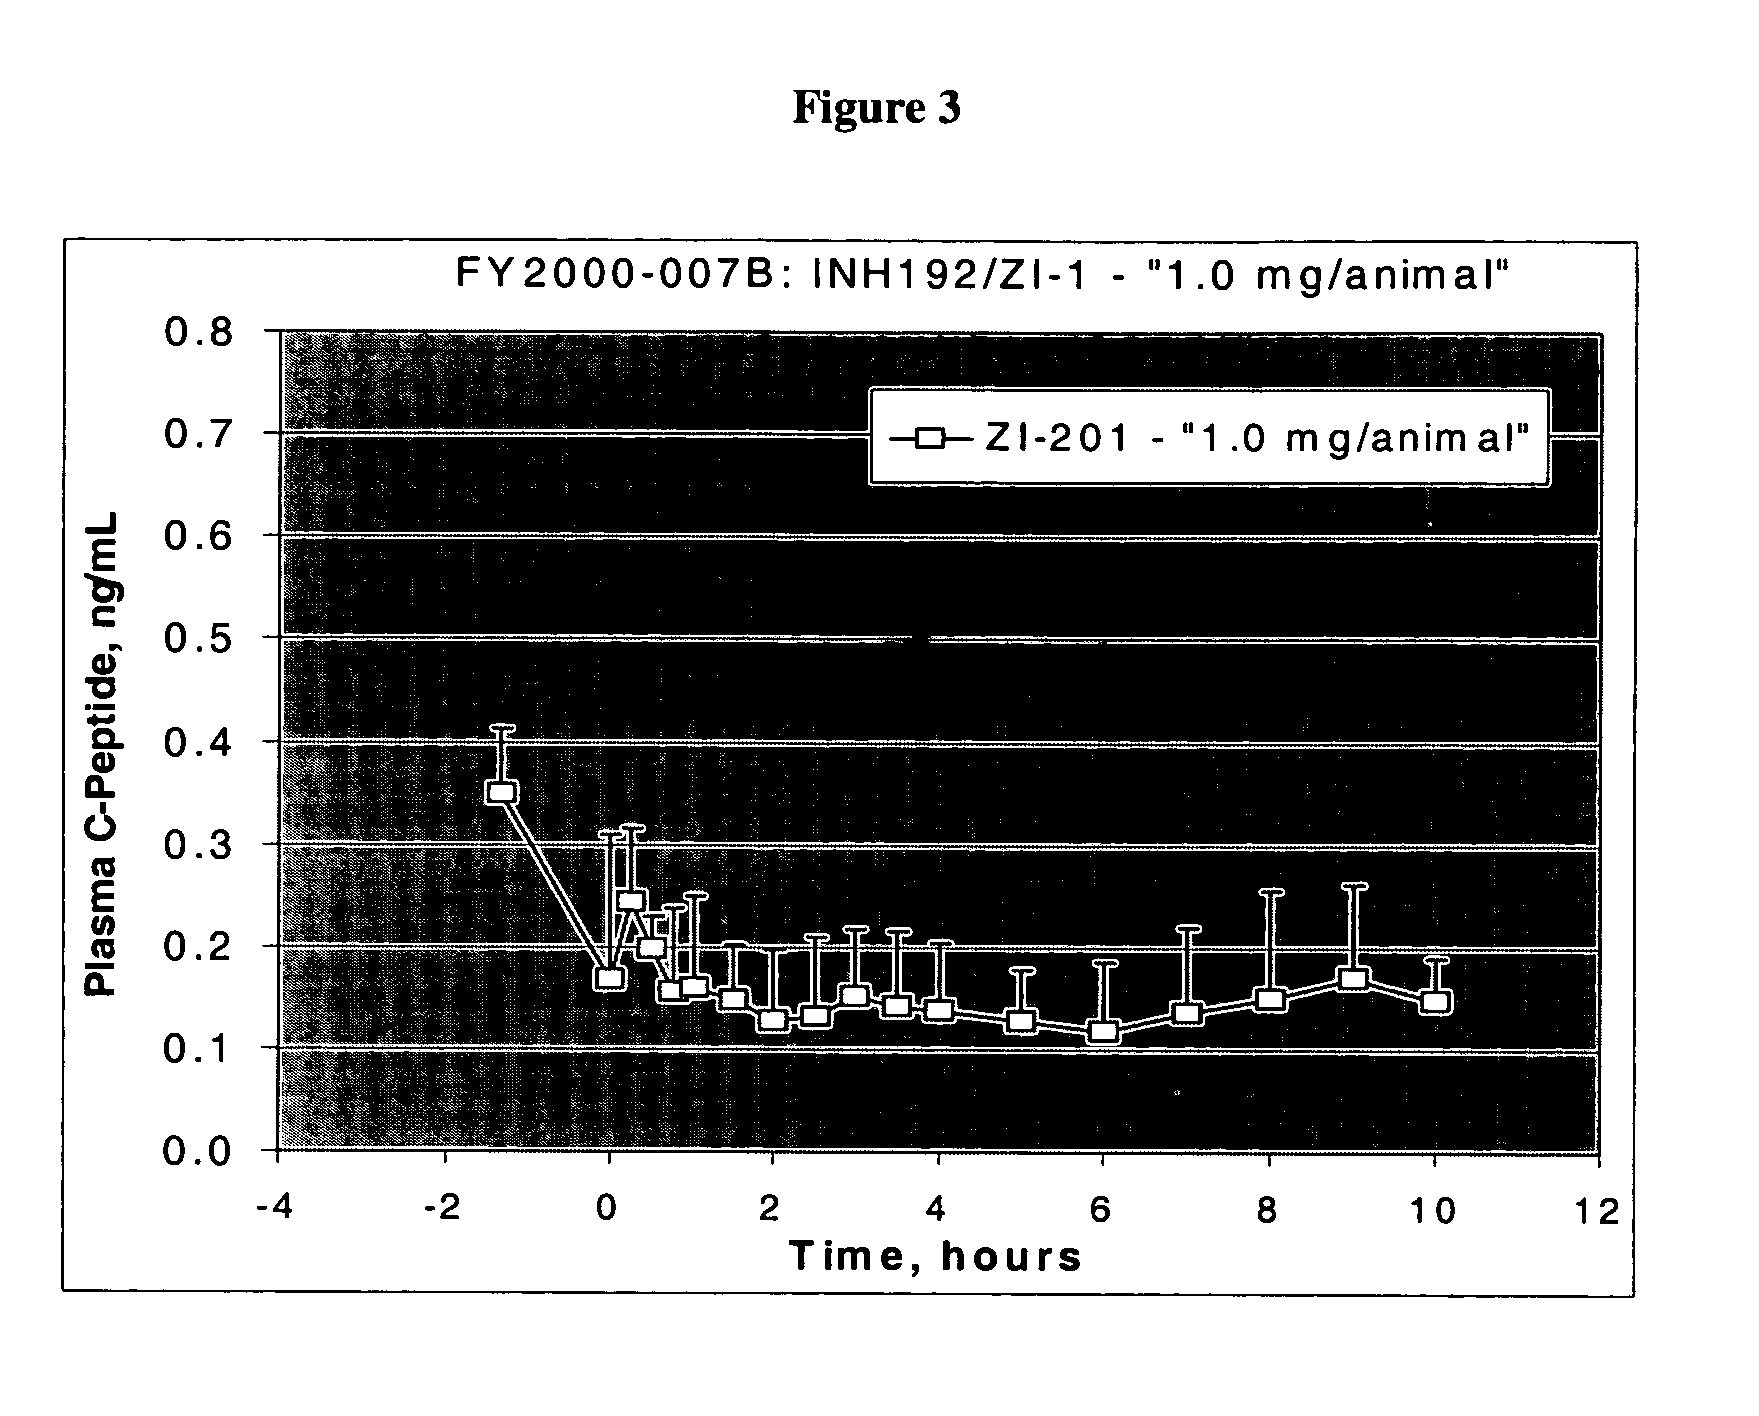 Sustained release compositions for delivery of pharmaceutical proteins